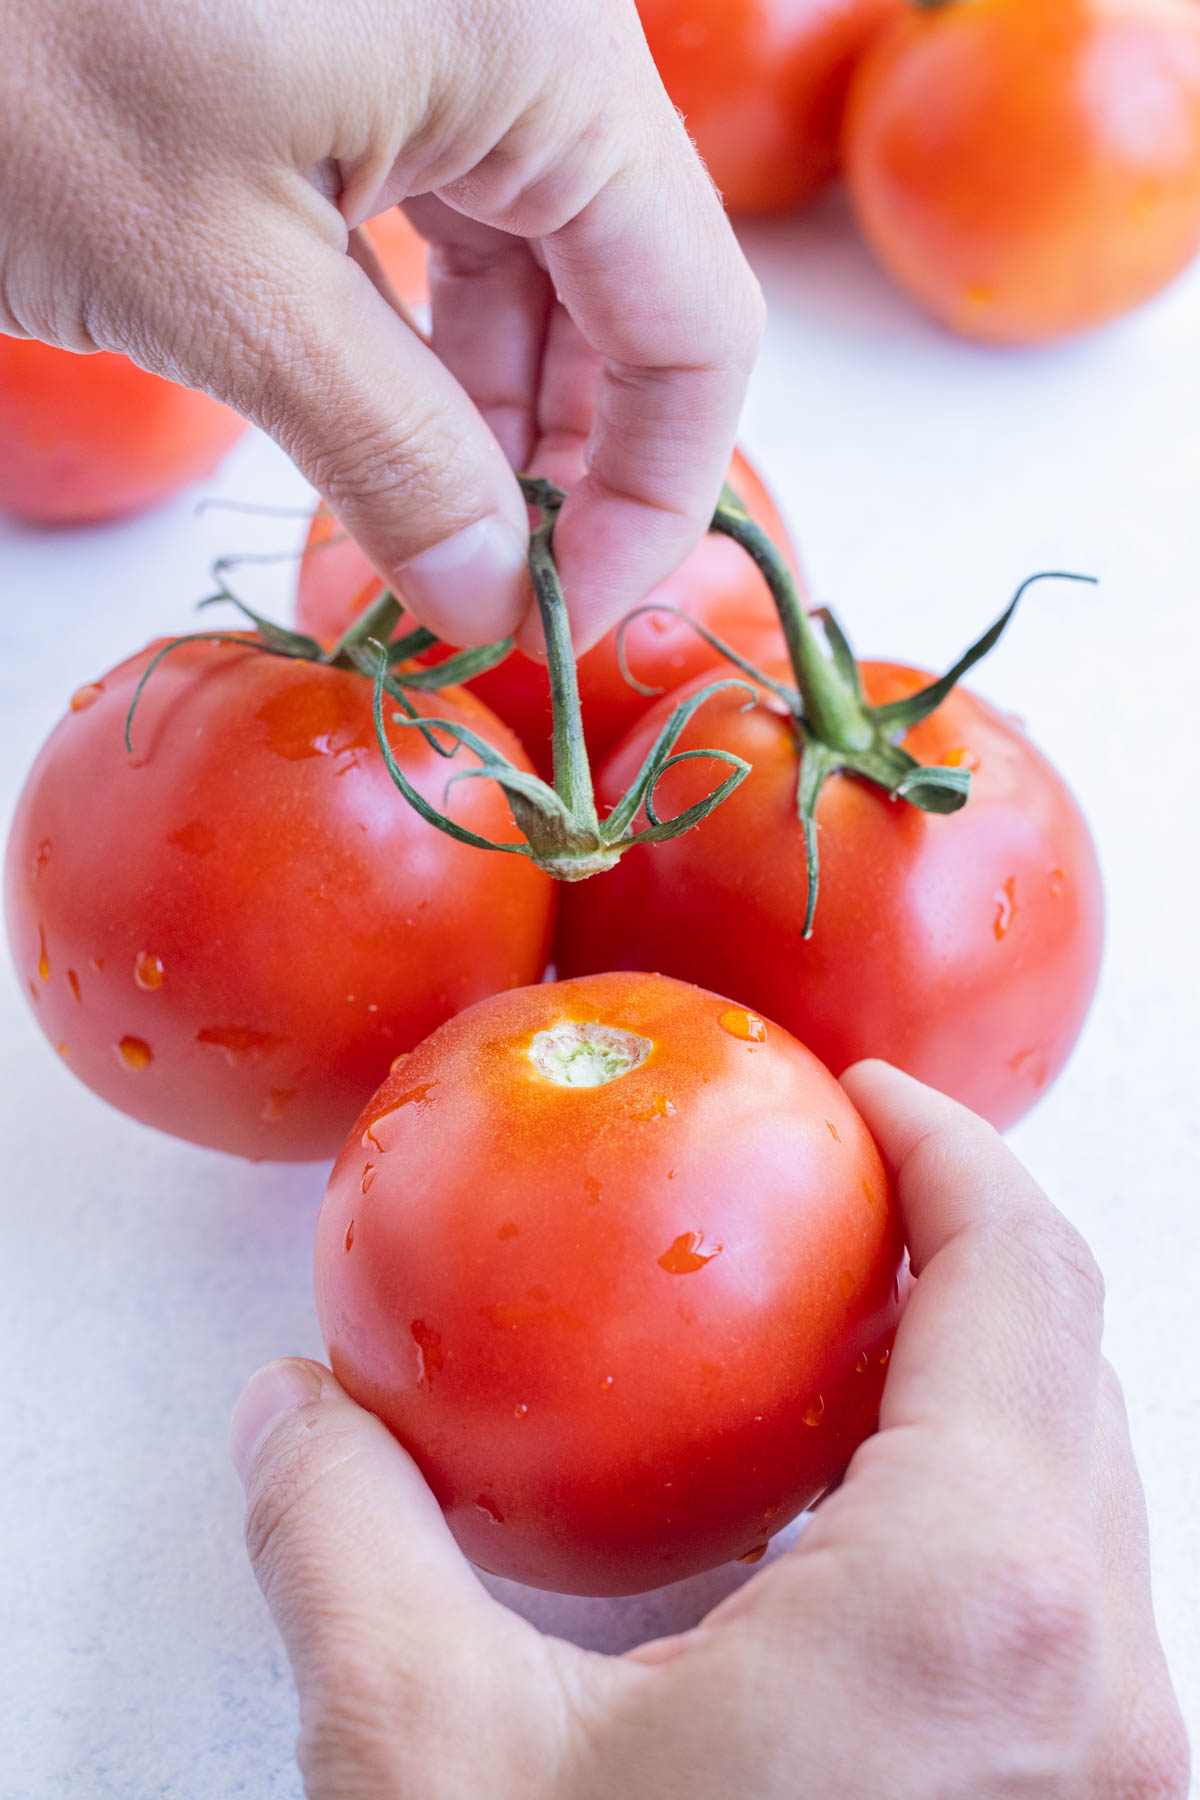 The stem is removed from three tomatoes